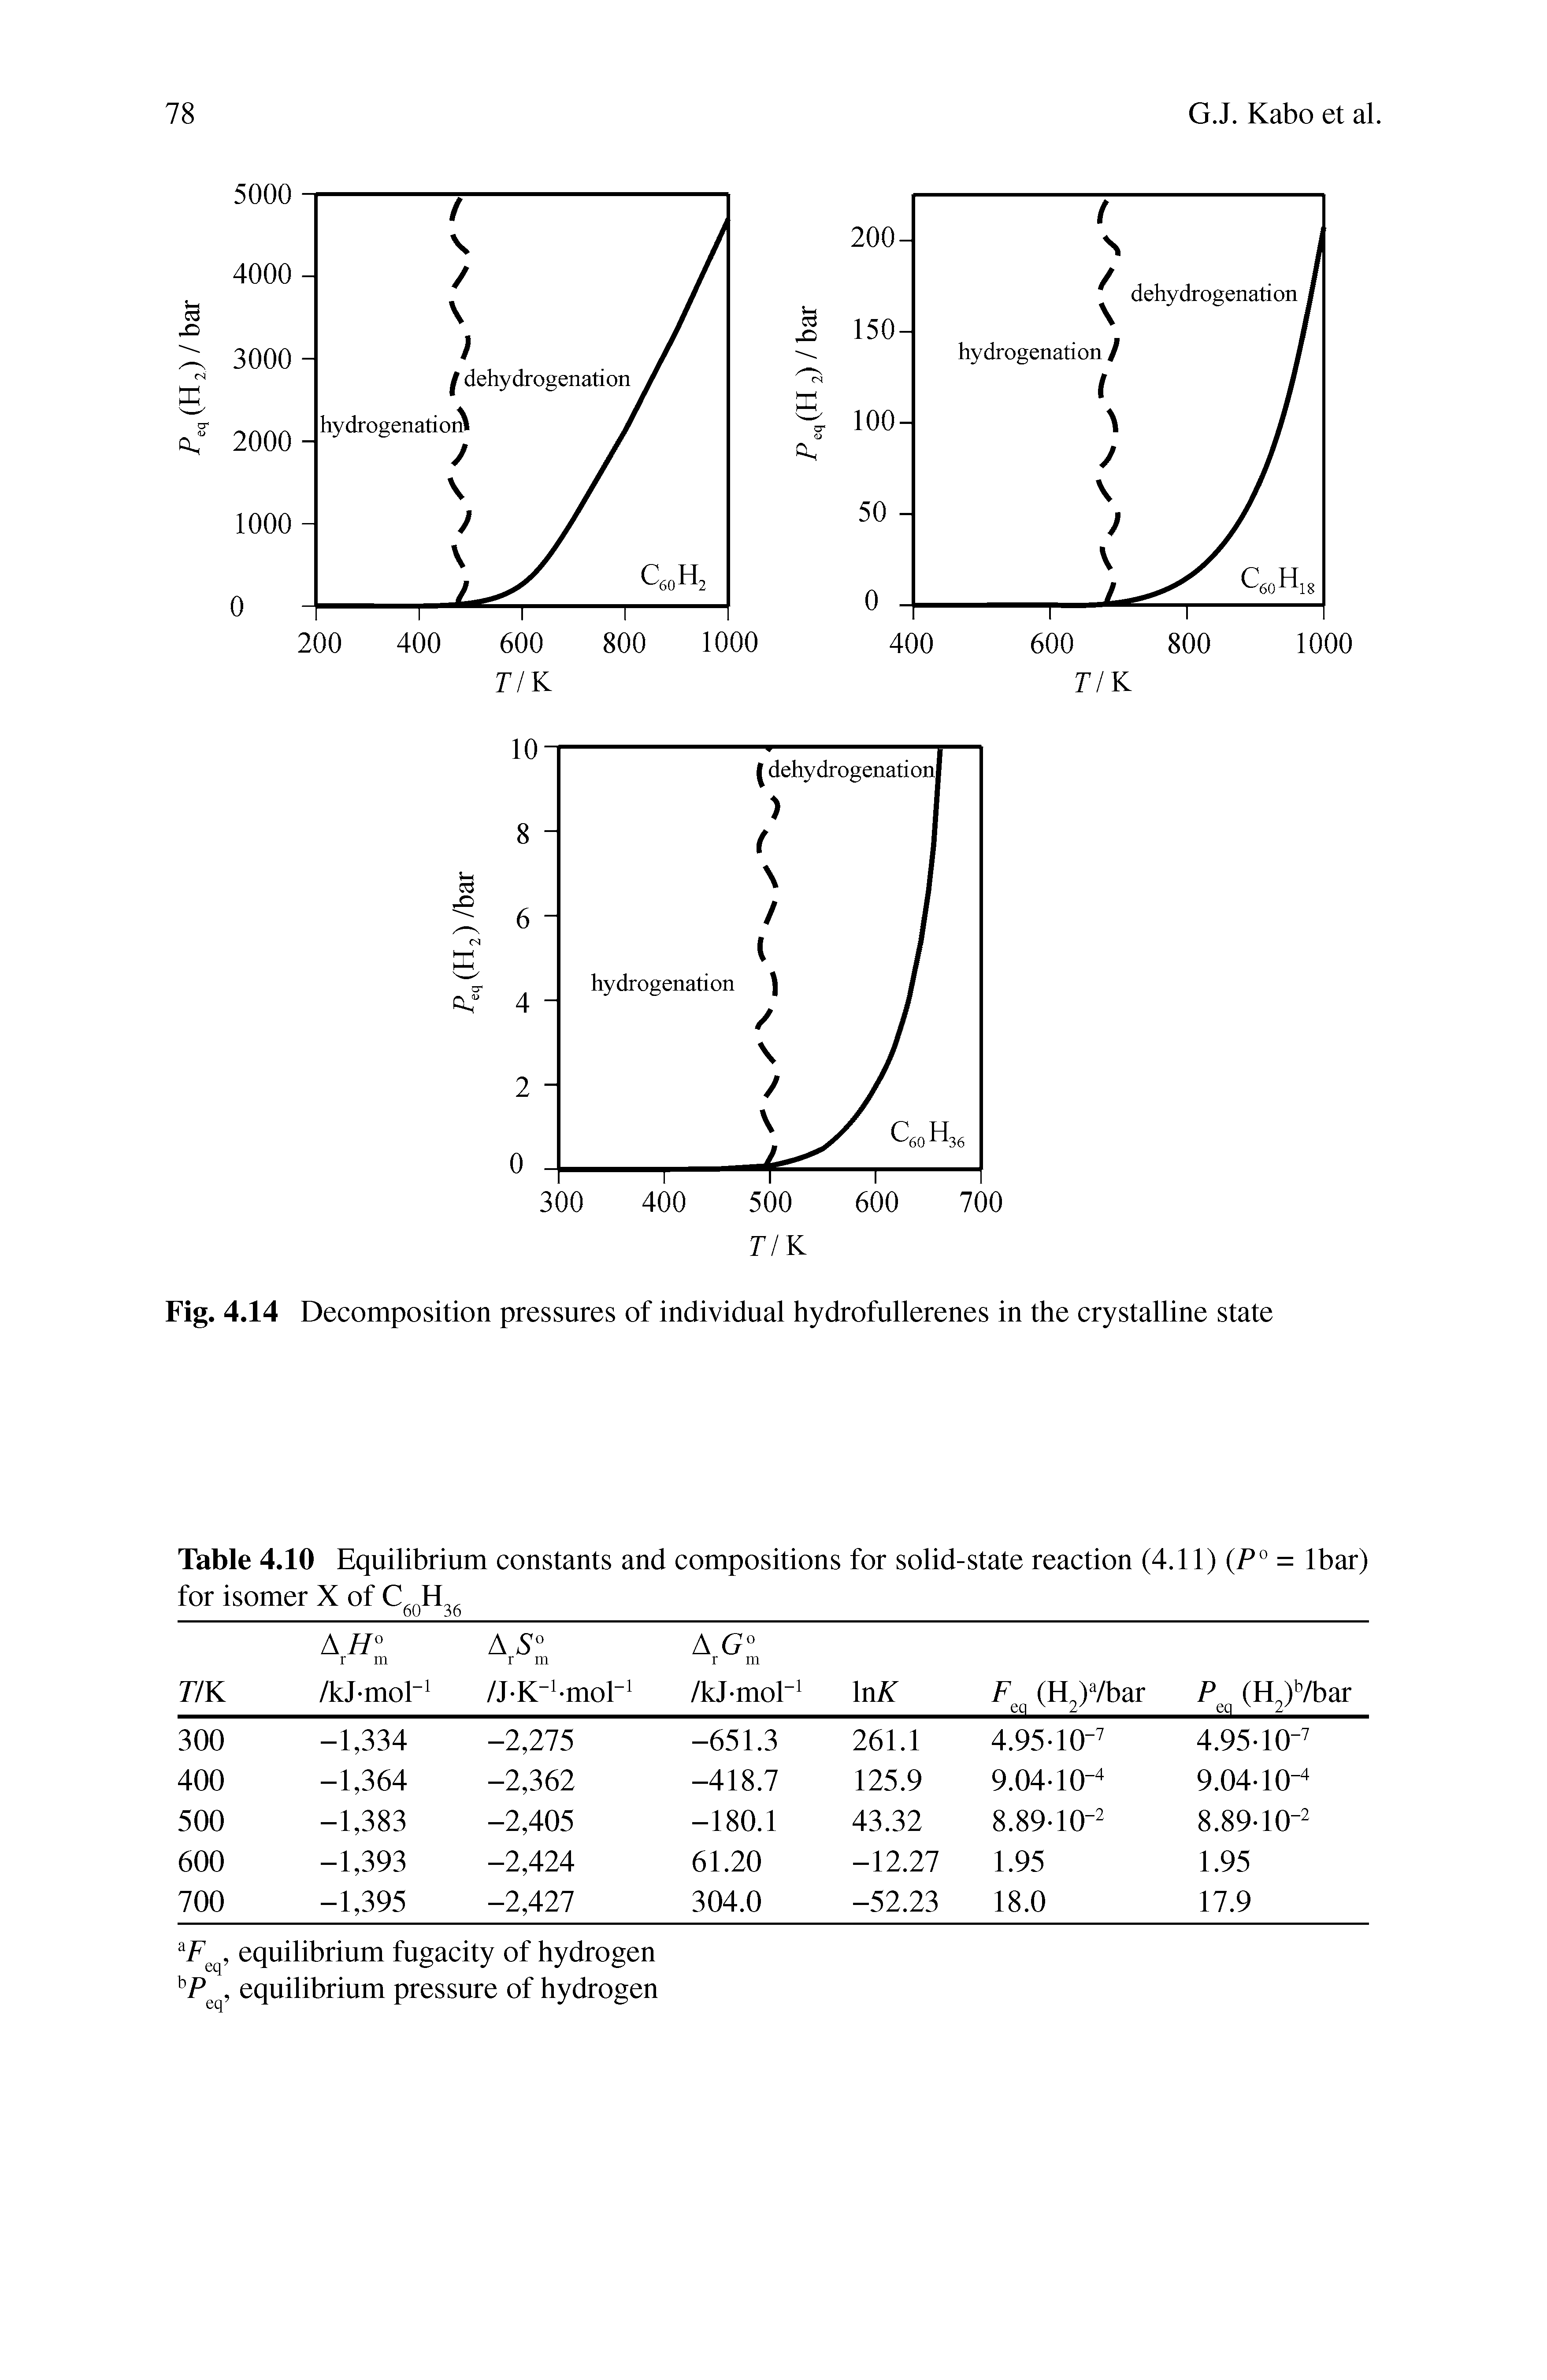 Table 4.10 Equilibrium constants and compositions for solid-state reaction (4.11) (P° = lbar) for isomer X of...